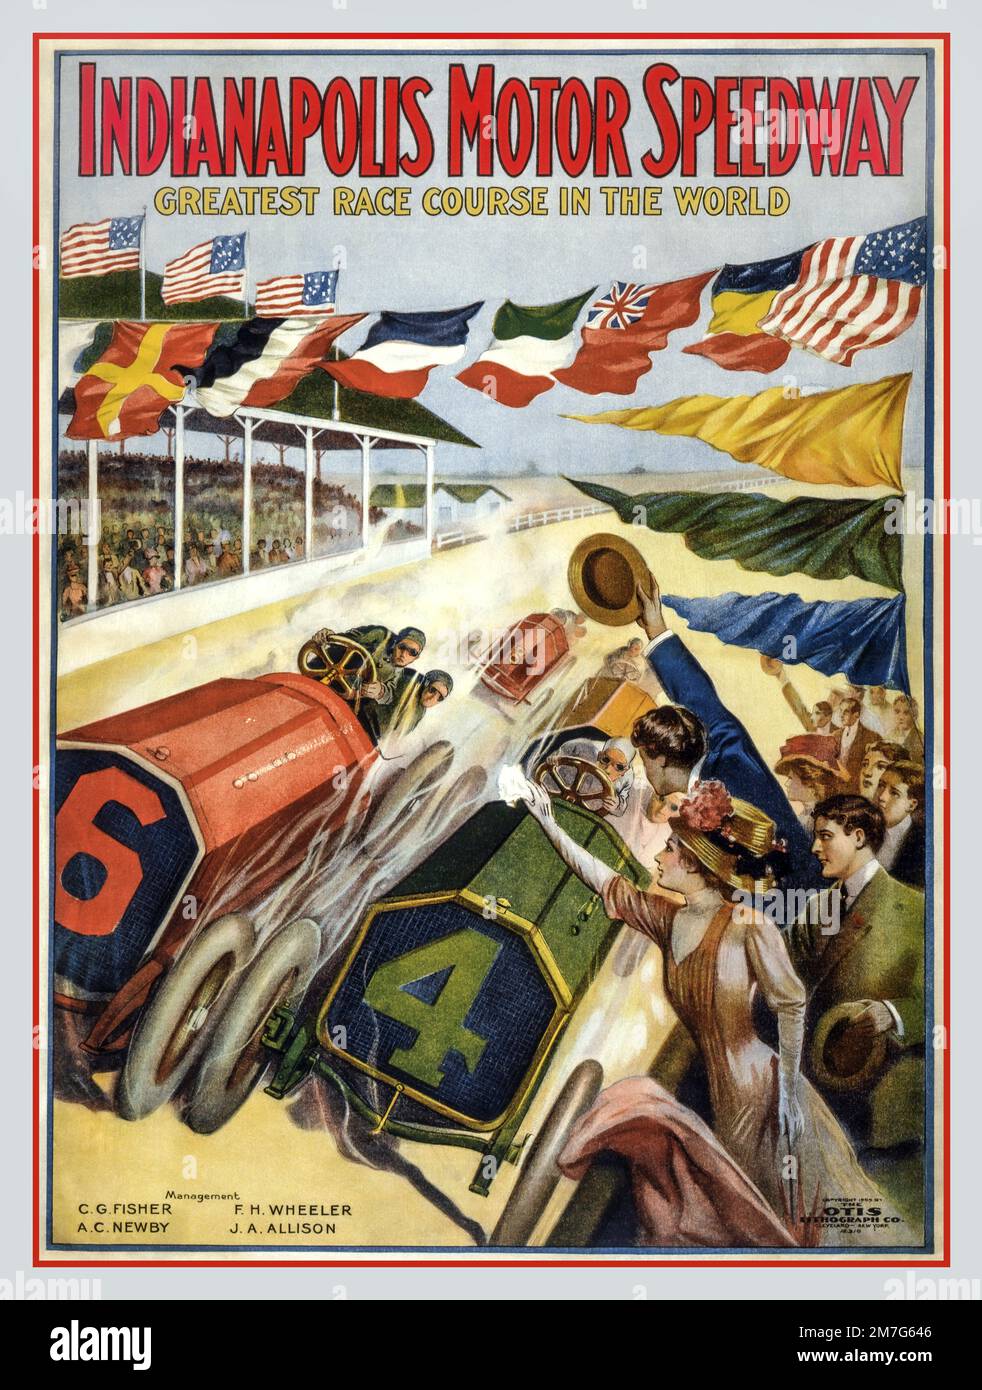 Vintage motor racing poster 'Indianapolis Motor Speedway' with international flags flying Otis Lithograph Co..1900s America USA 'Greatest Race Course In The World' Stock Photo